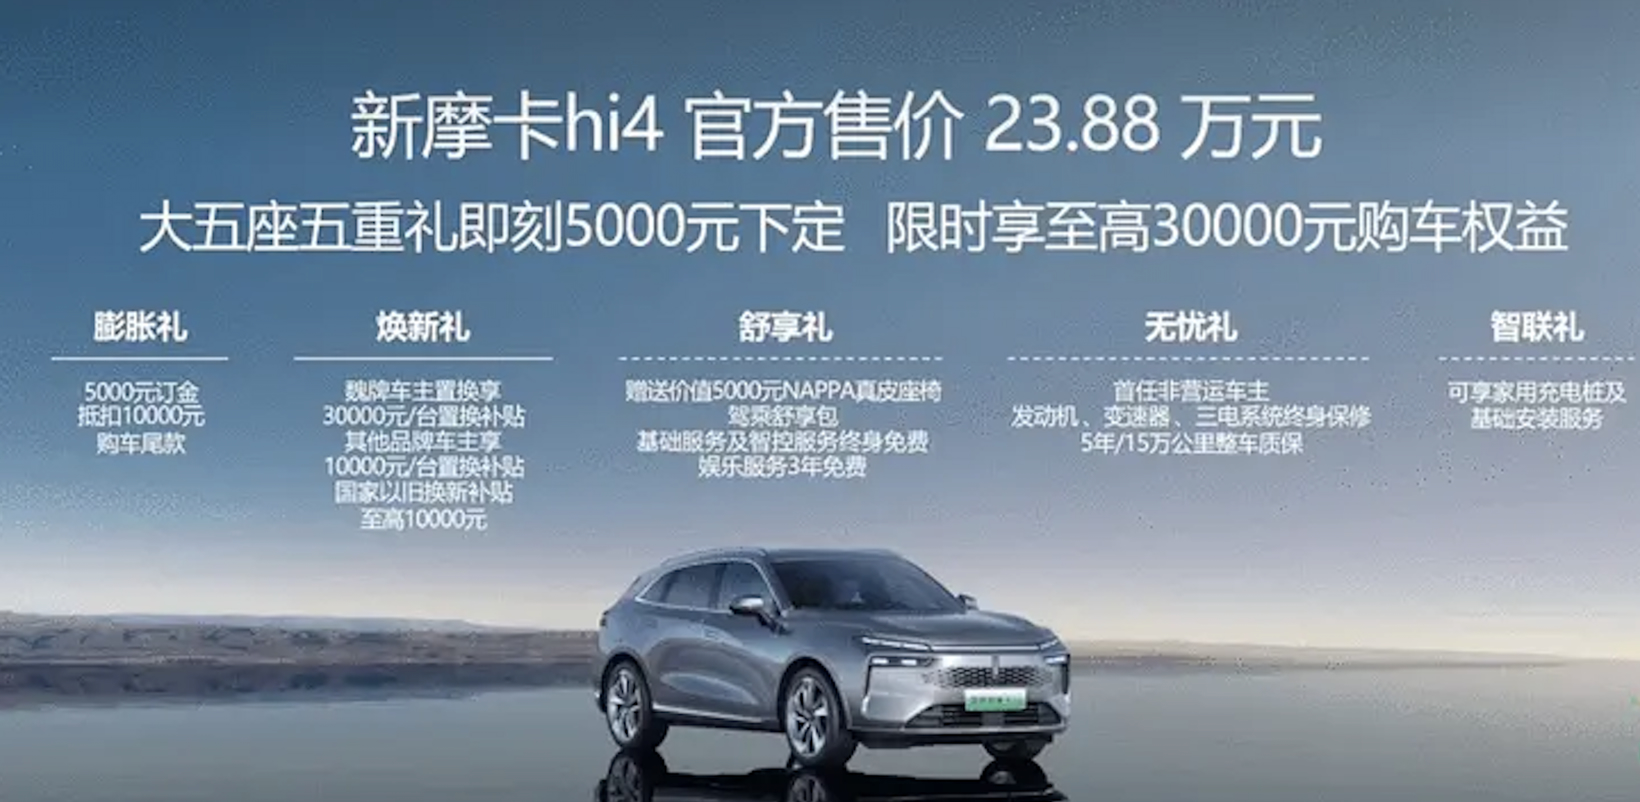 New Mocha Hi4: Discounts up to 25,000 Yuan! High-End Electric Four-Wheel Drive with Intelligent Features